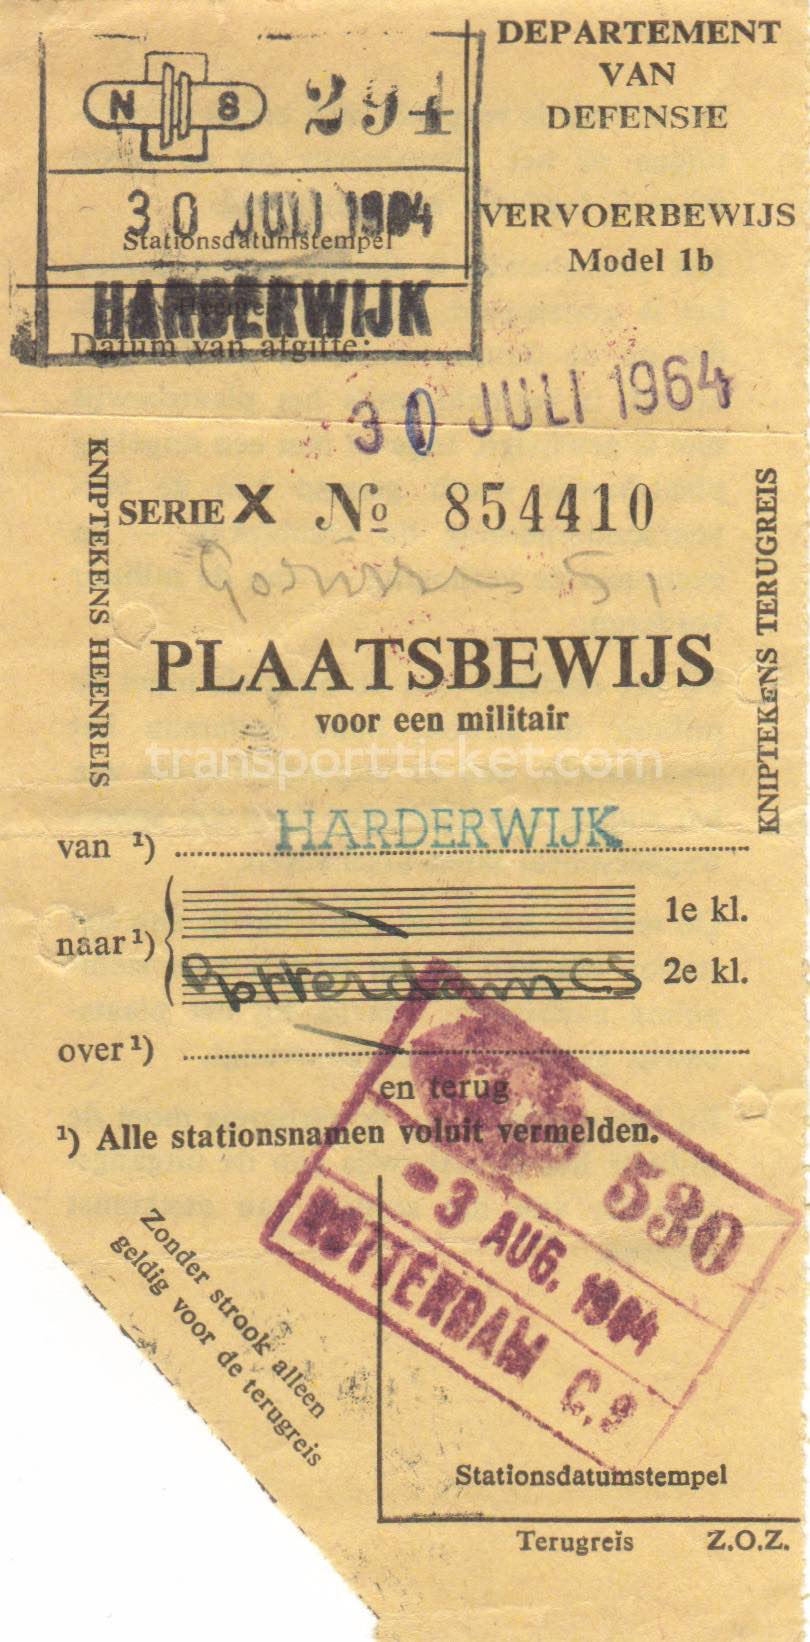 transport ticket issued by Dutch Department of Defense (1964)